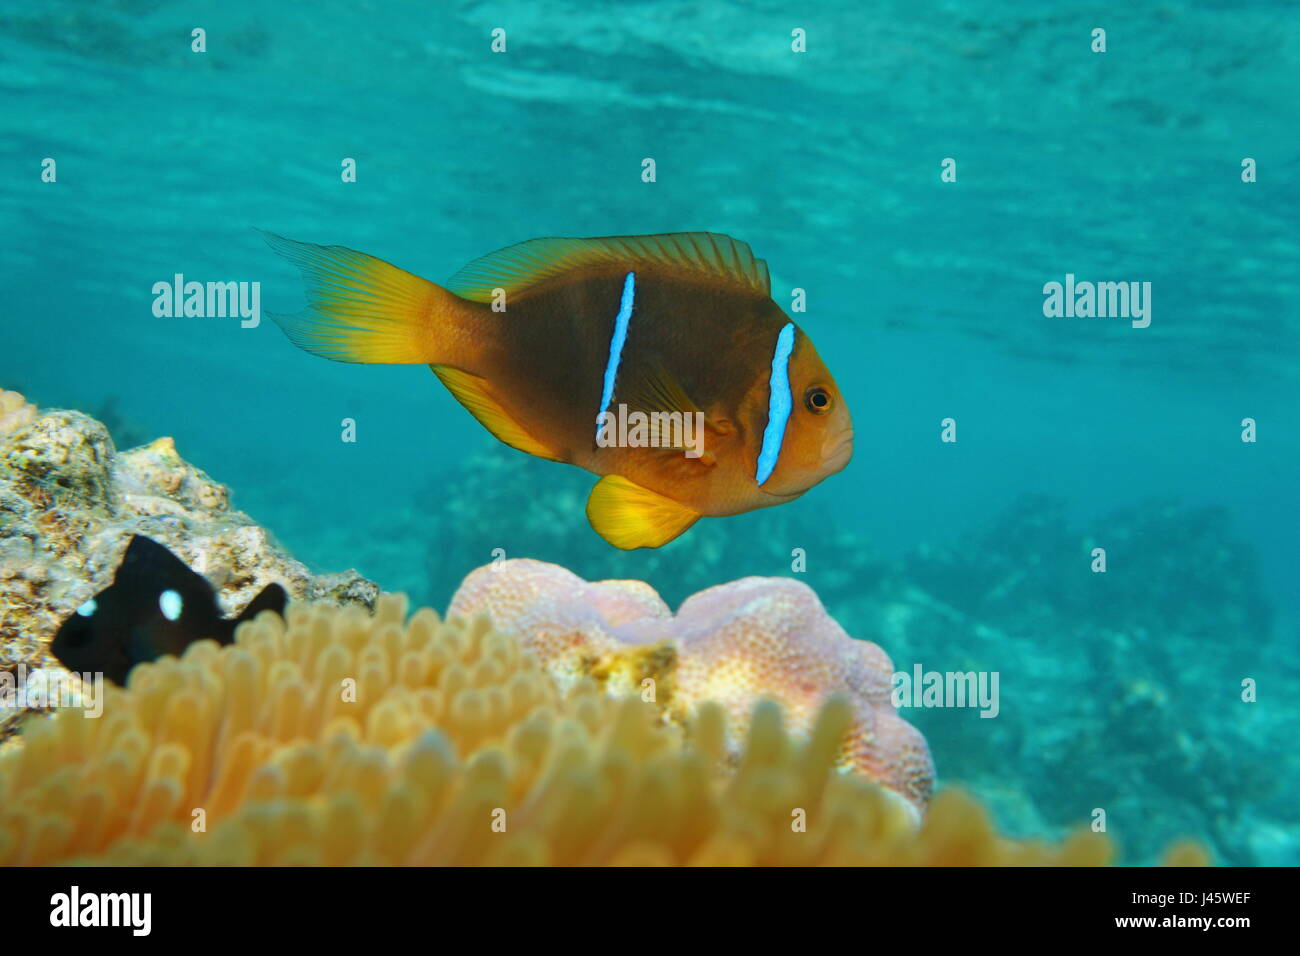 Tropical fish clownfish Amphiprion chrysopterus, orange-fin anemonefish underwater in the Pacific ocean, French Polynesia Stock Photo